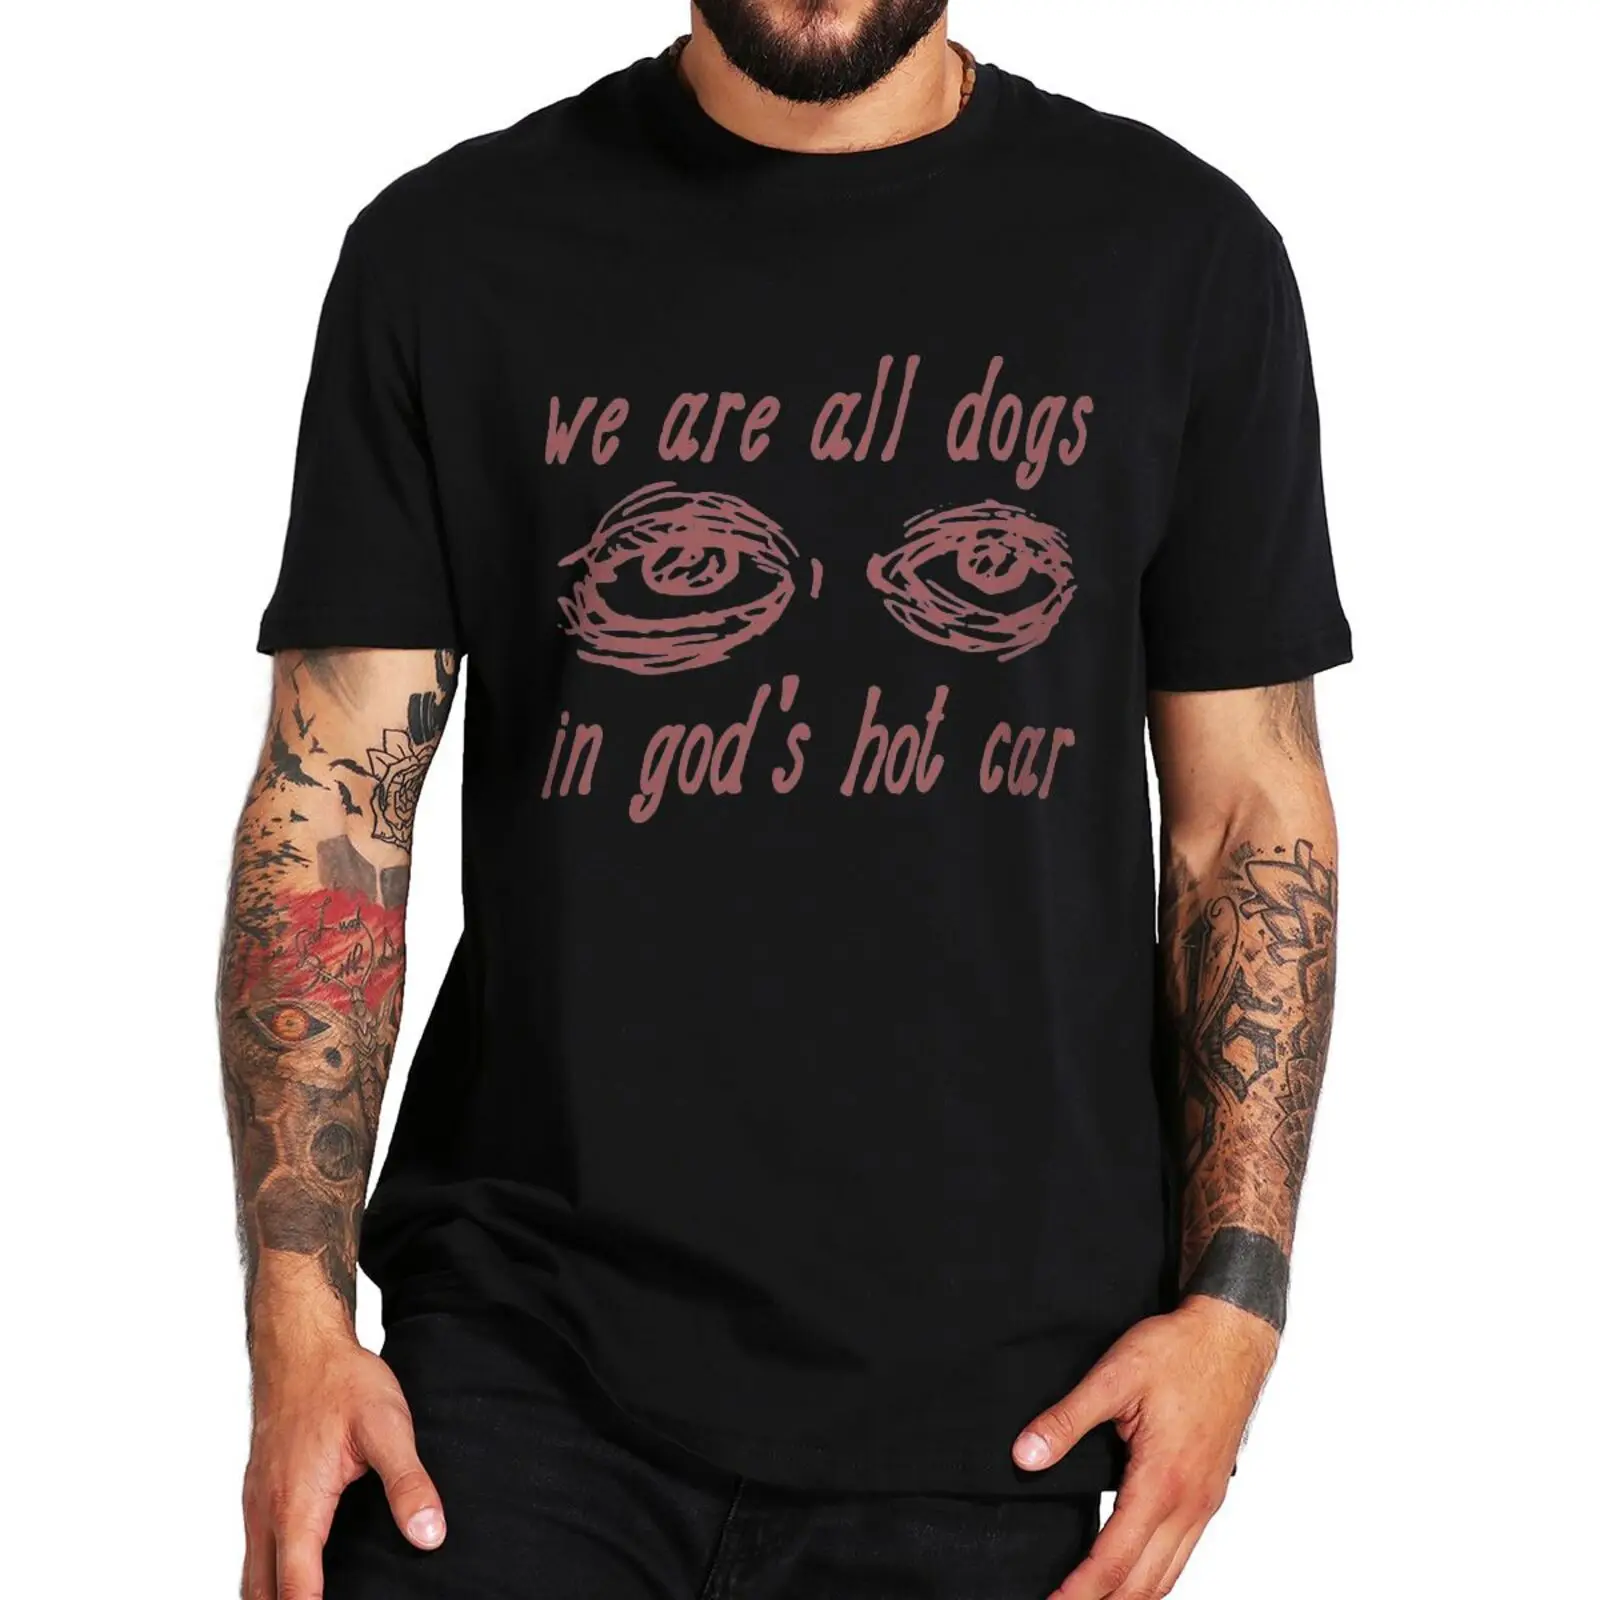 

We Are All Dogs In God's Hot Car T Shirt Funny Oddly Meme Graphic Tee Tops Casual 100% Cotton Summer Unisex Oversized T-shirts